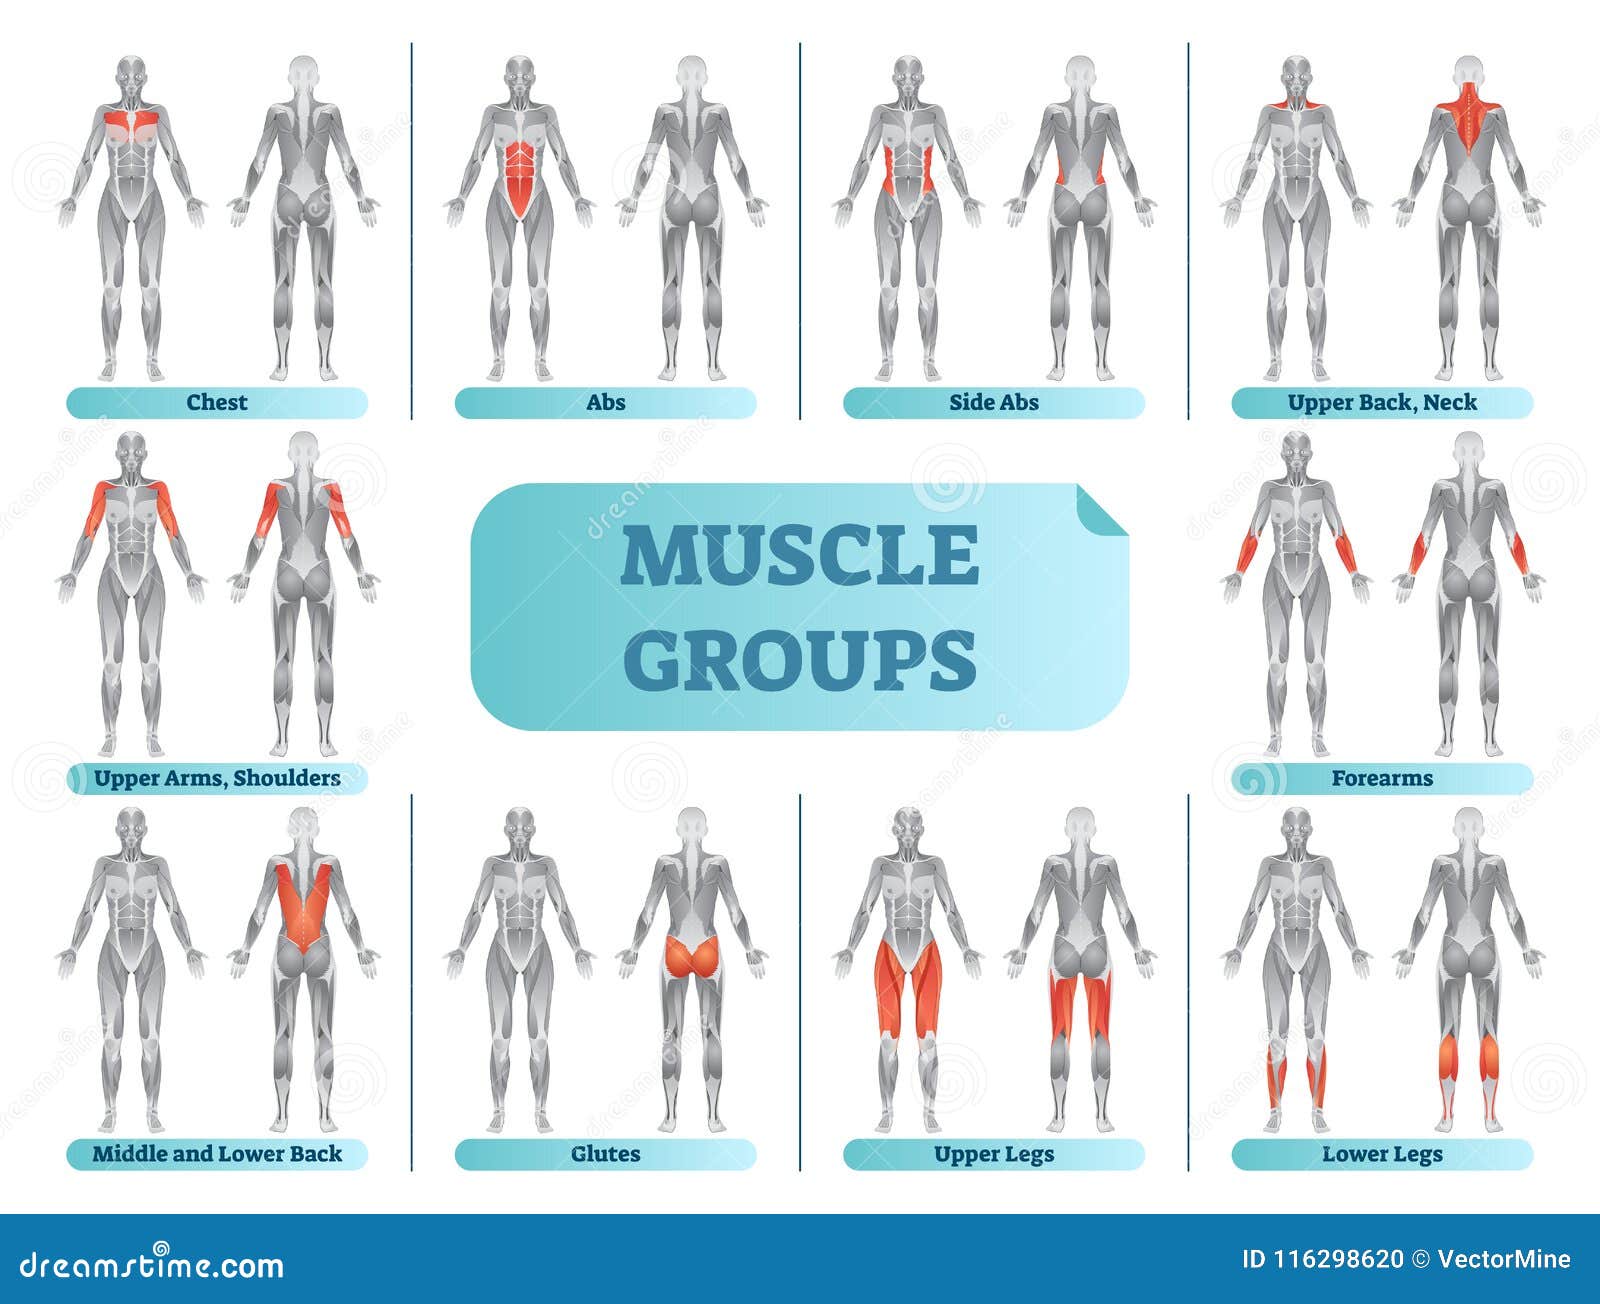 Muscle Group Workout Chart